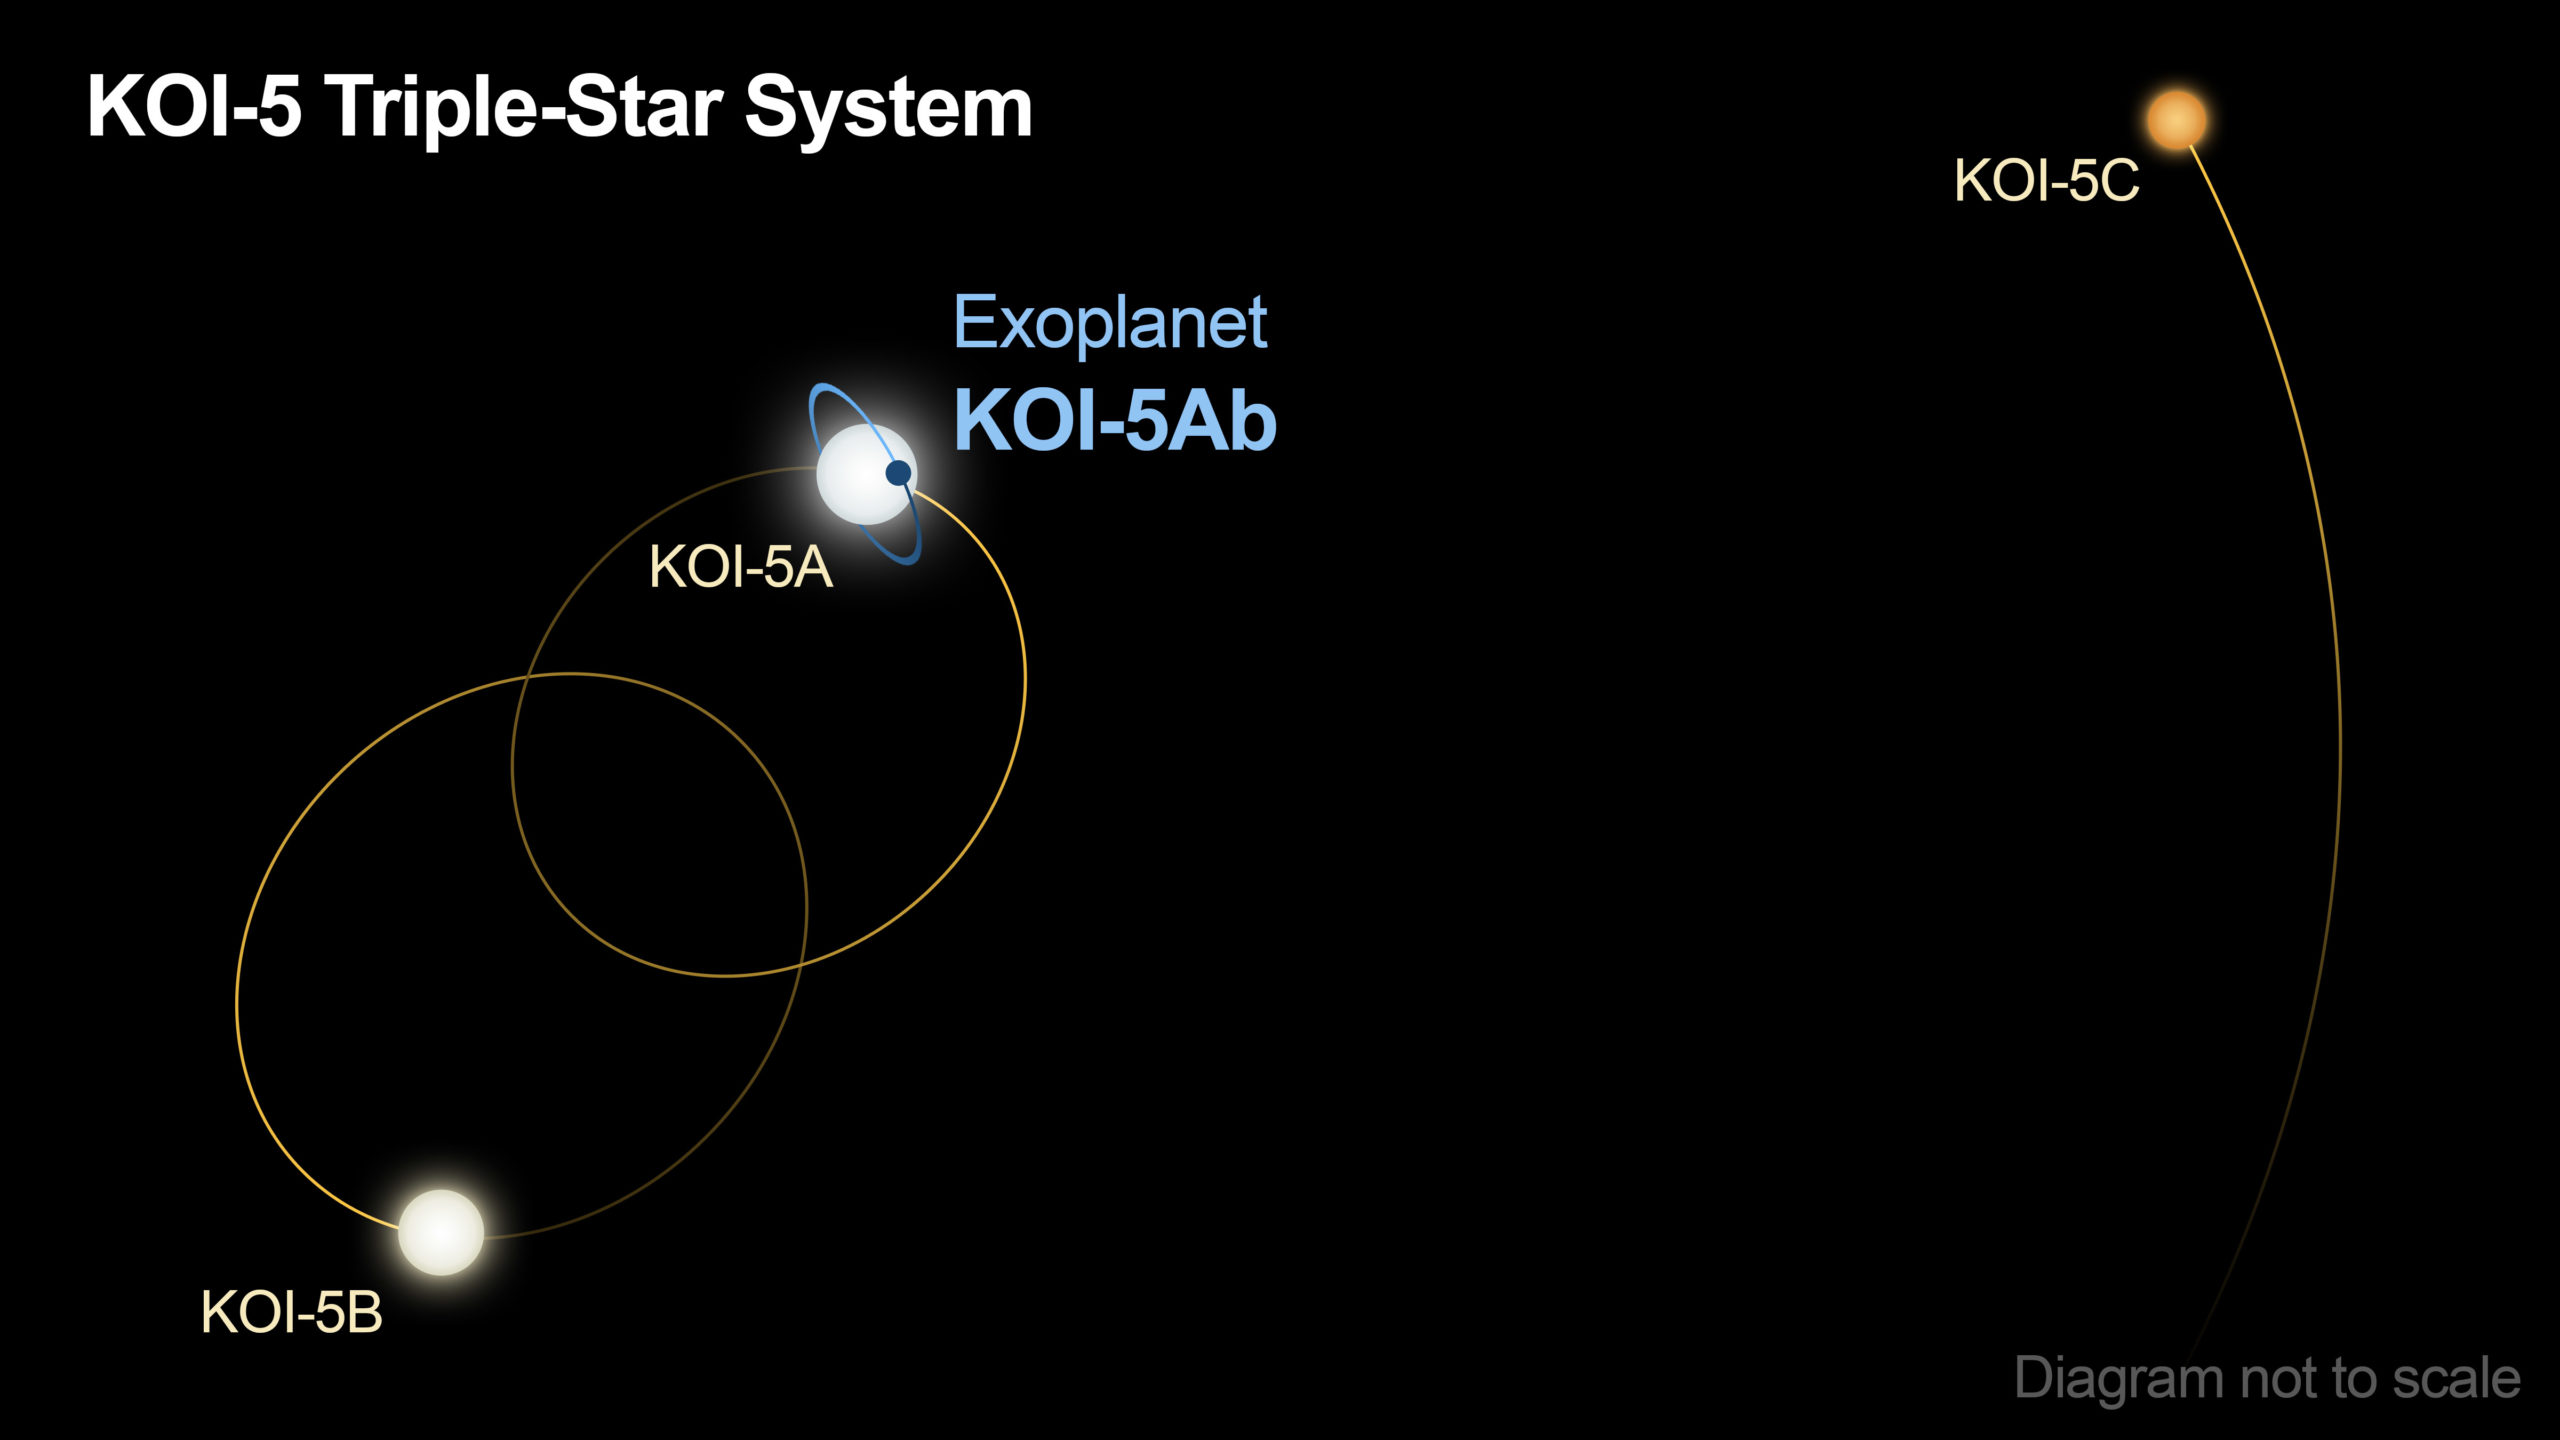 Diagram showing the orbital plane of exoplanet KOI-5Ab, and the orbital plane shared by stars KOI-5A and KOI-5B (not to scale).  (Graphic: Caltech/R. Hurt (Infrared Processing and Analysis Centre, or IPAC))